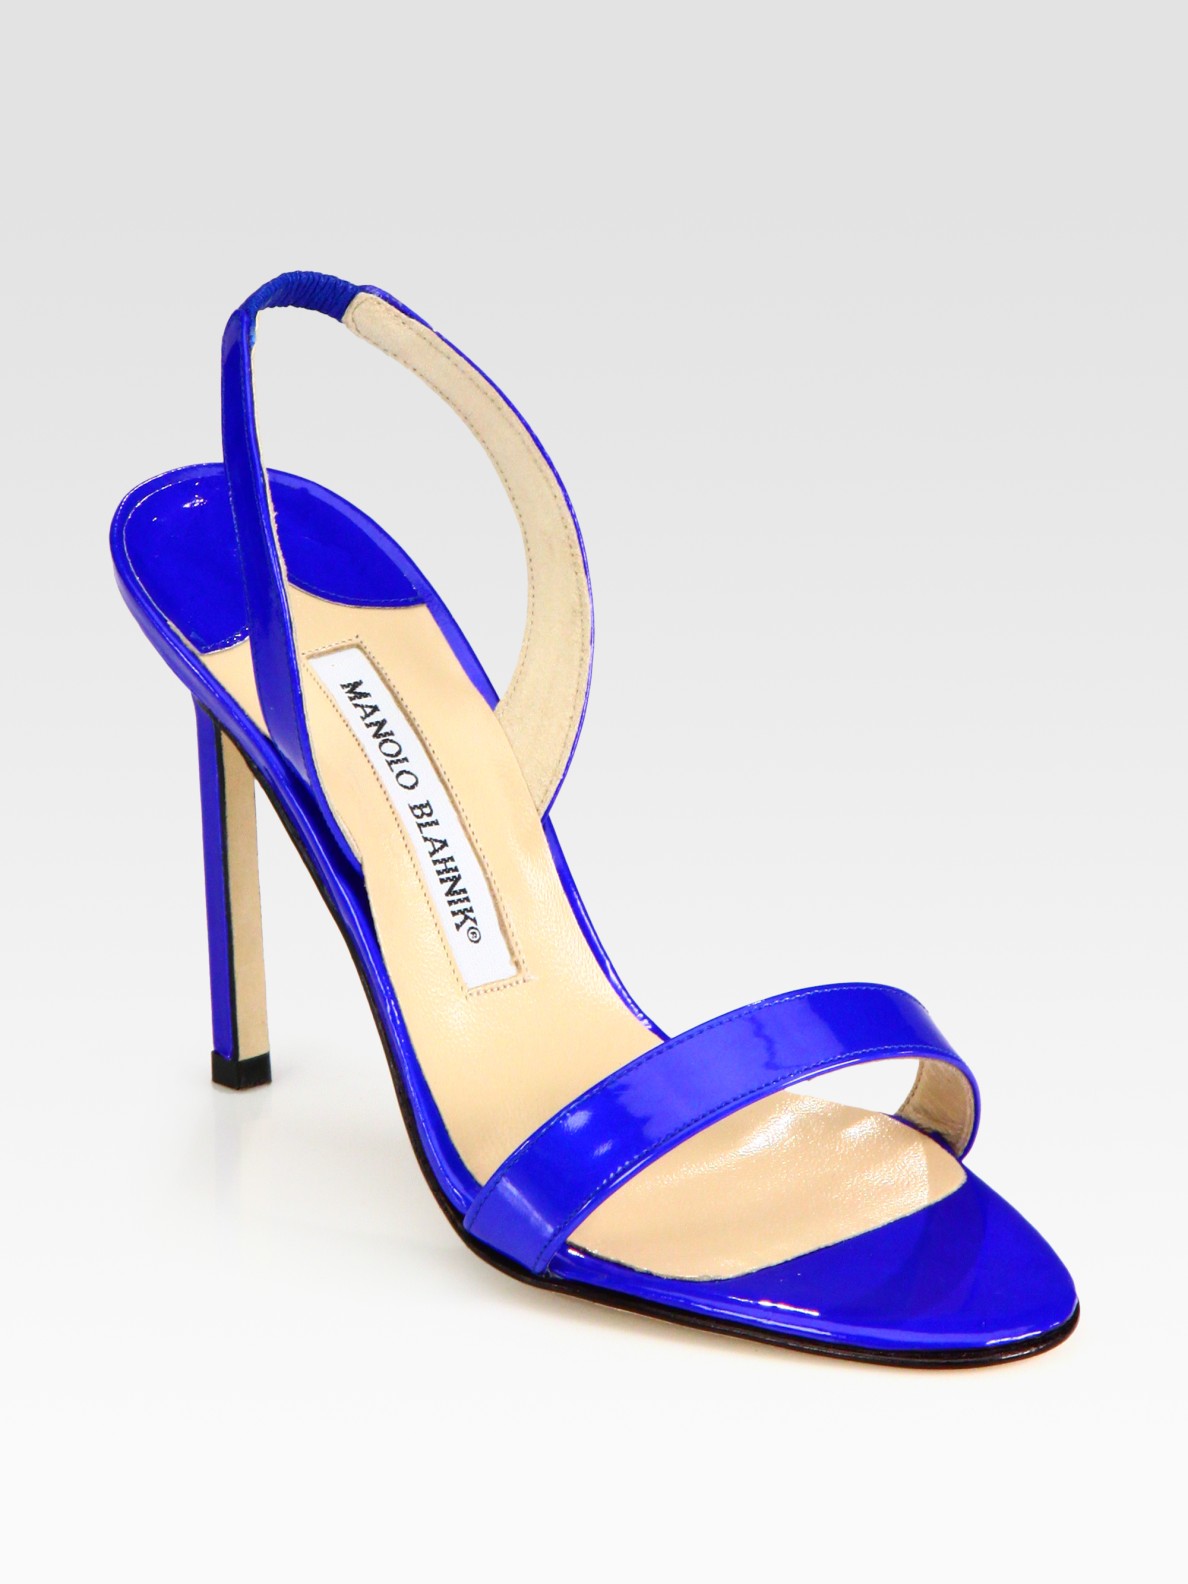 Manolo Blahnik Patent Leather Slingback Sandals in Blue | Lyst